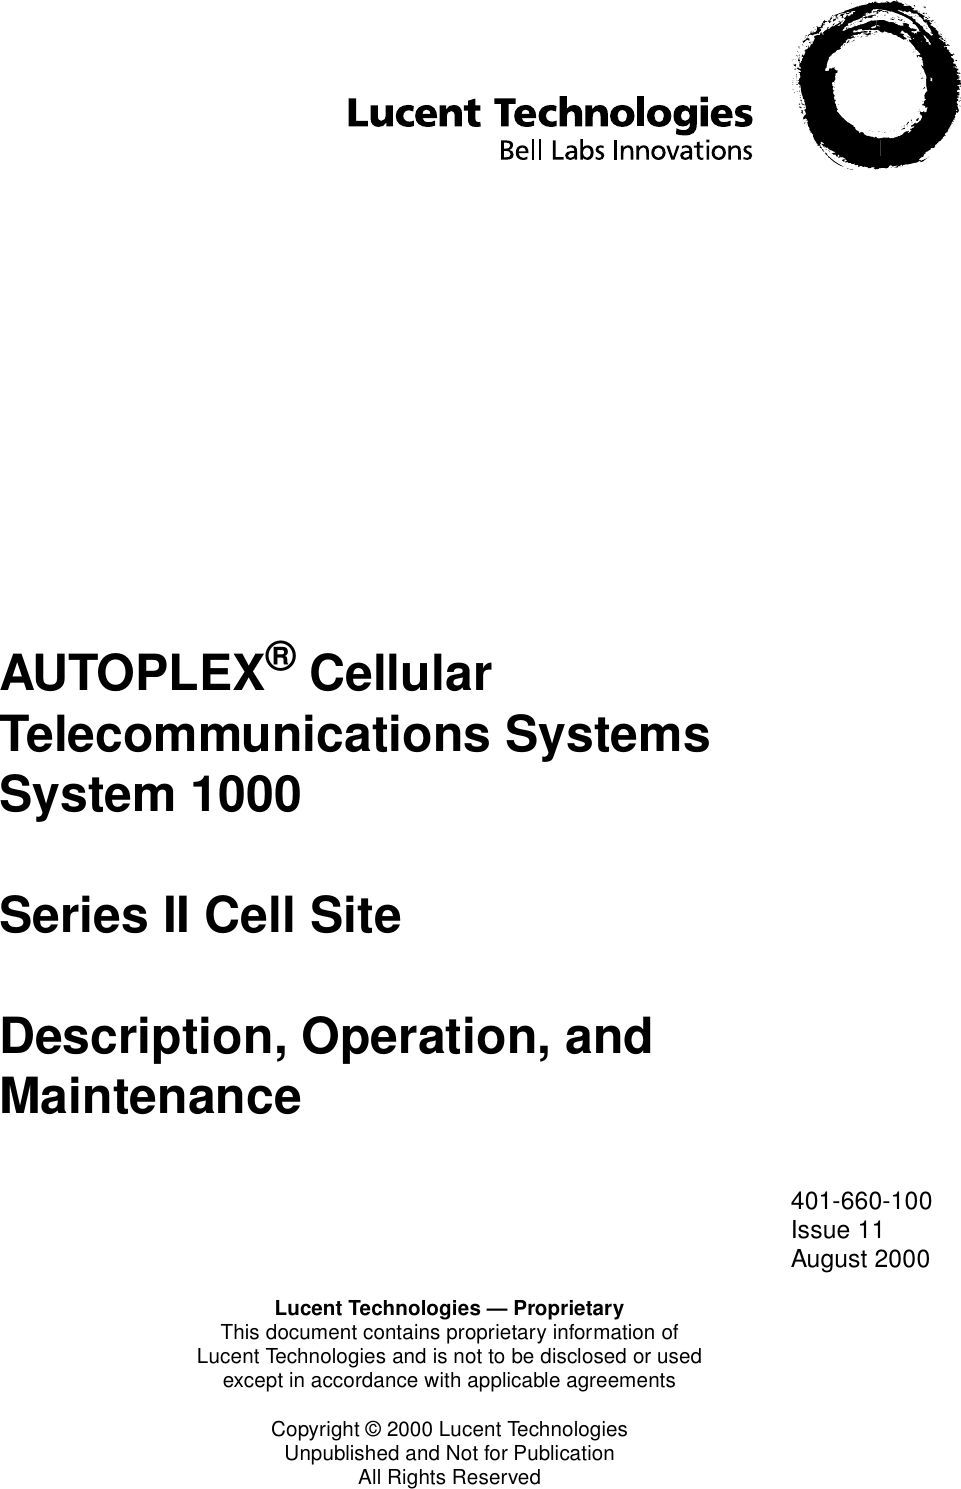 Lucent Technologies — ProprietaryThis document contains proprietary information ofLucent Technologies and is not to be disclosed or usedexcept in accordance with applicable agreementsCopyright © 2000 Lucent TechnologiesUnpublished and Not for PublicationAll Rights Reserved401-660-100Issue 11August 2000AUTOPLEX® Cellular Telecommunications Systems System 1000Series II Cell SiteDescription, Operation, and Maintenance